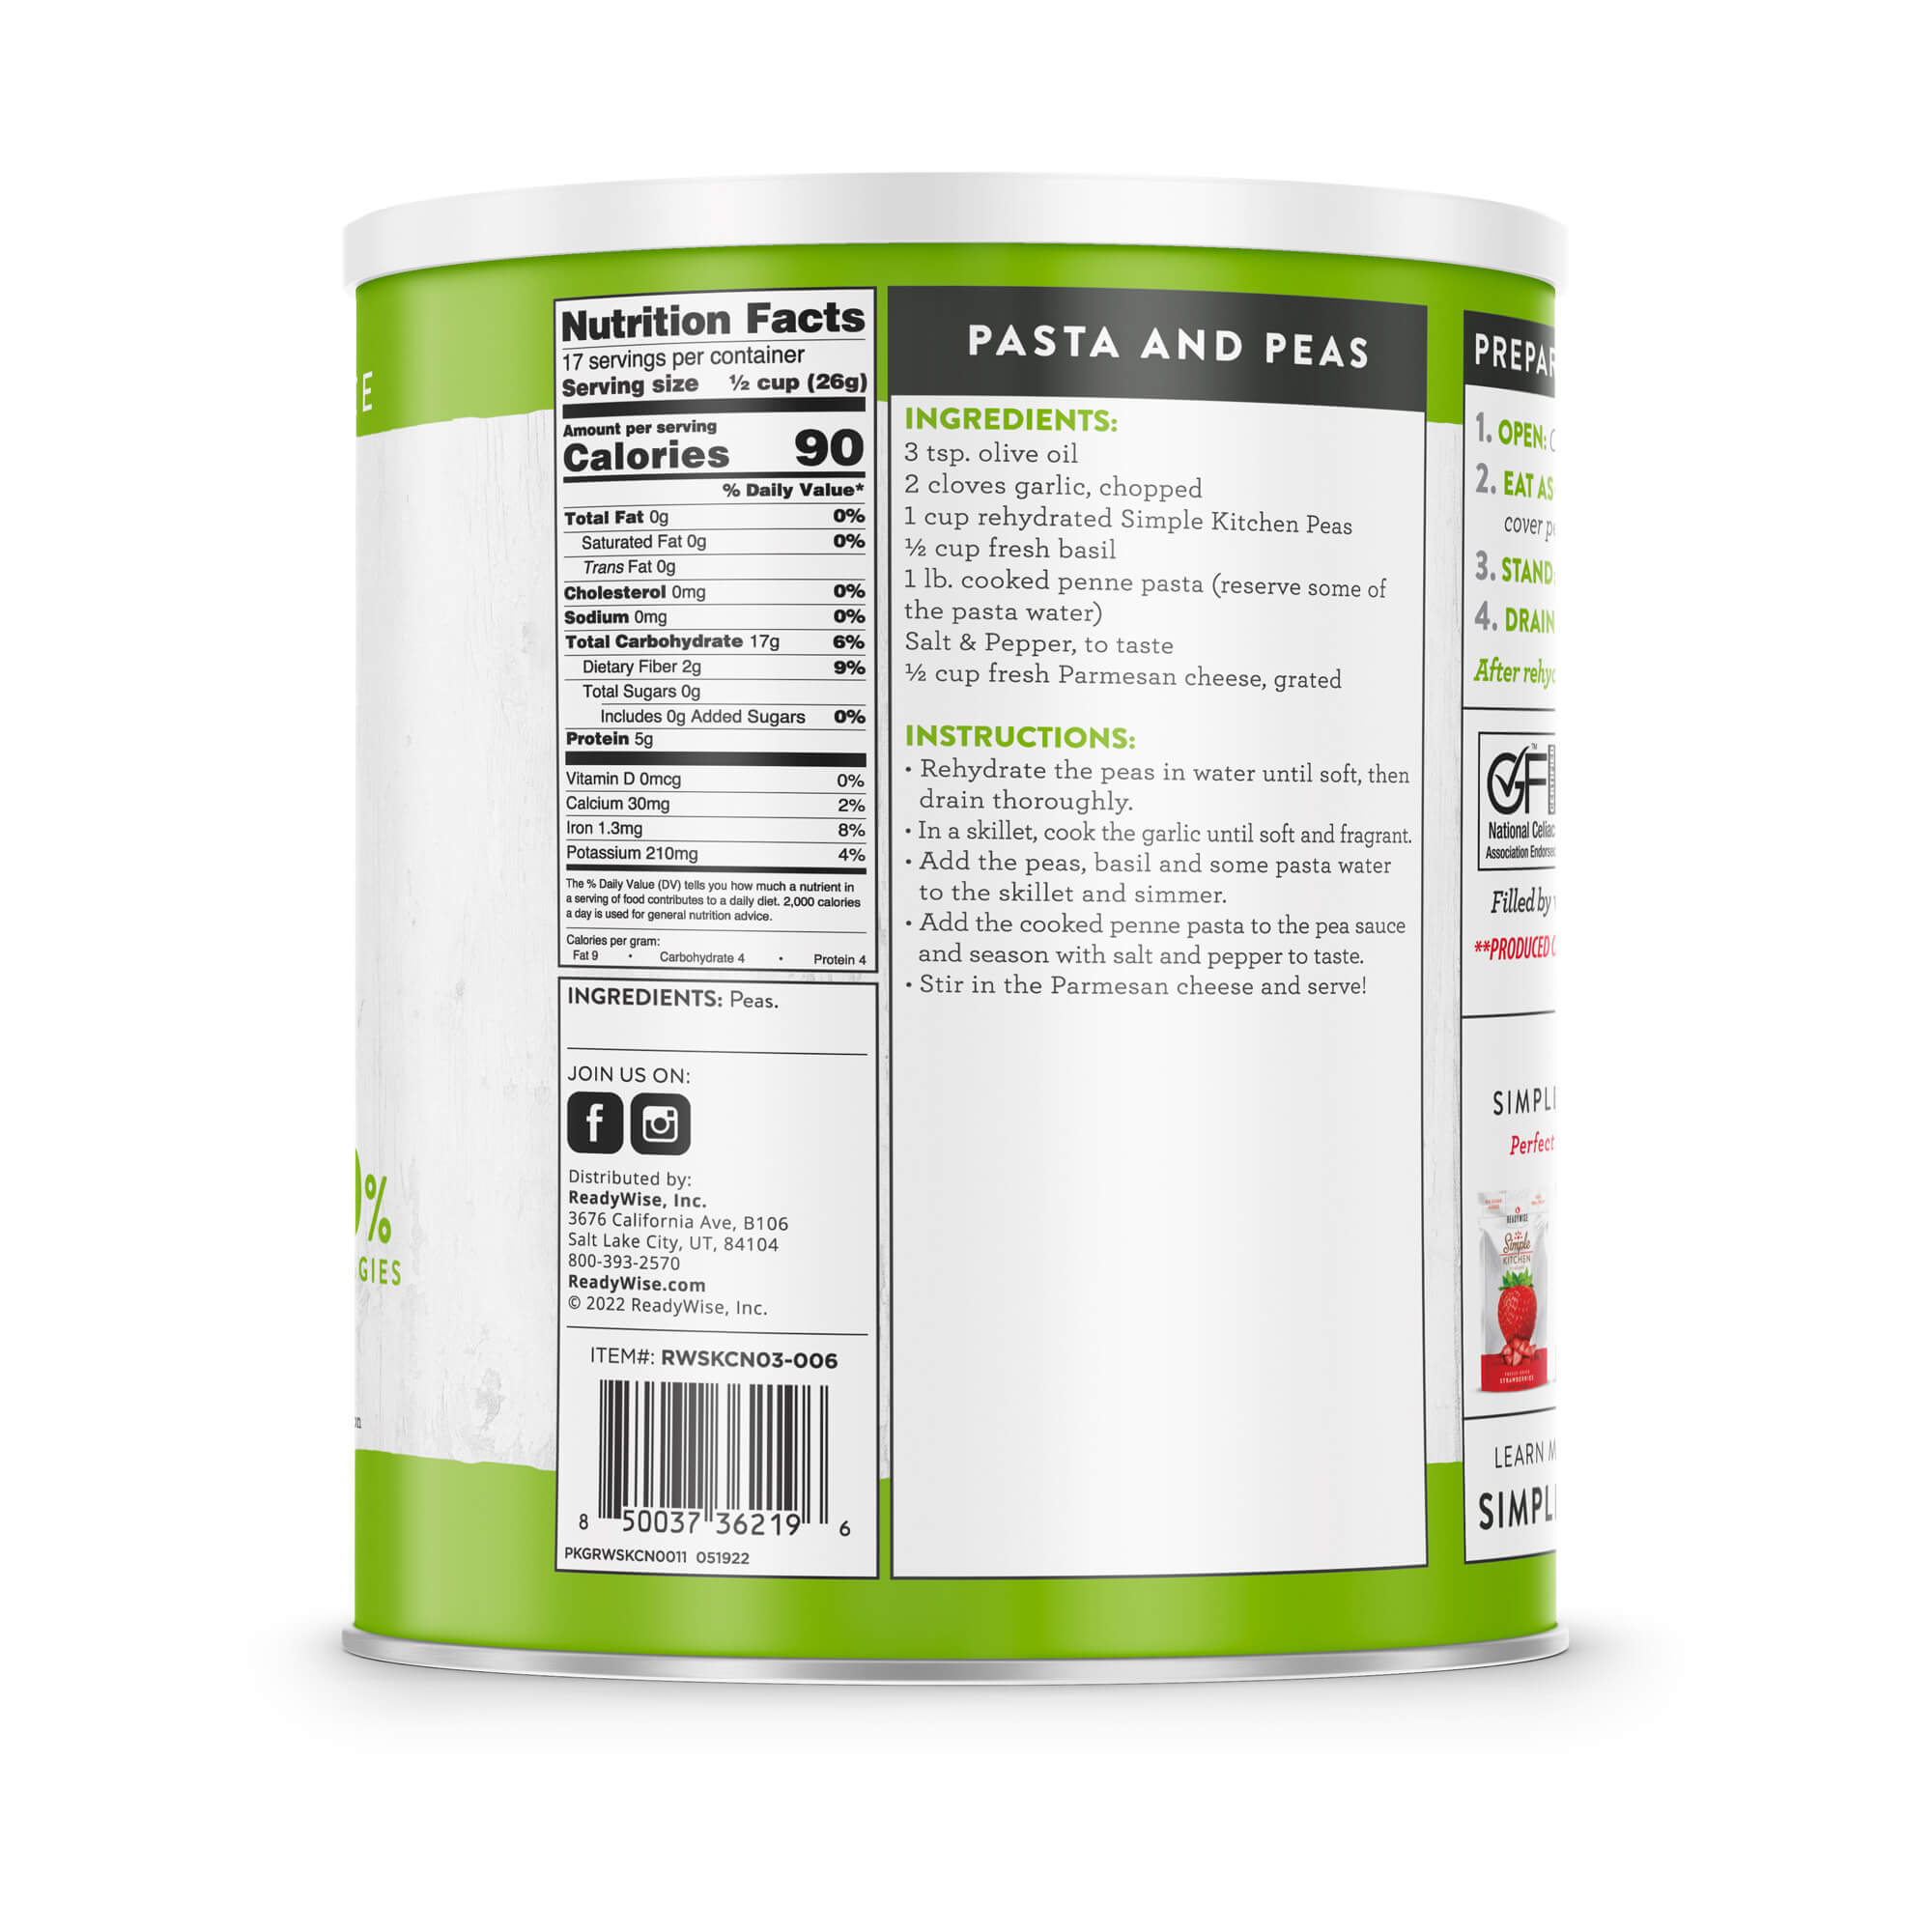 Simple-Kitchen-#10-can-freeze-dried-peas-back